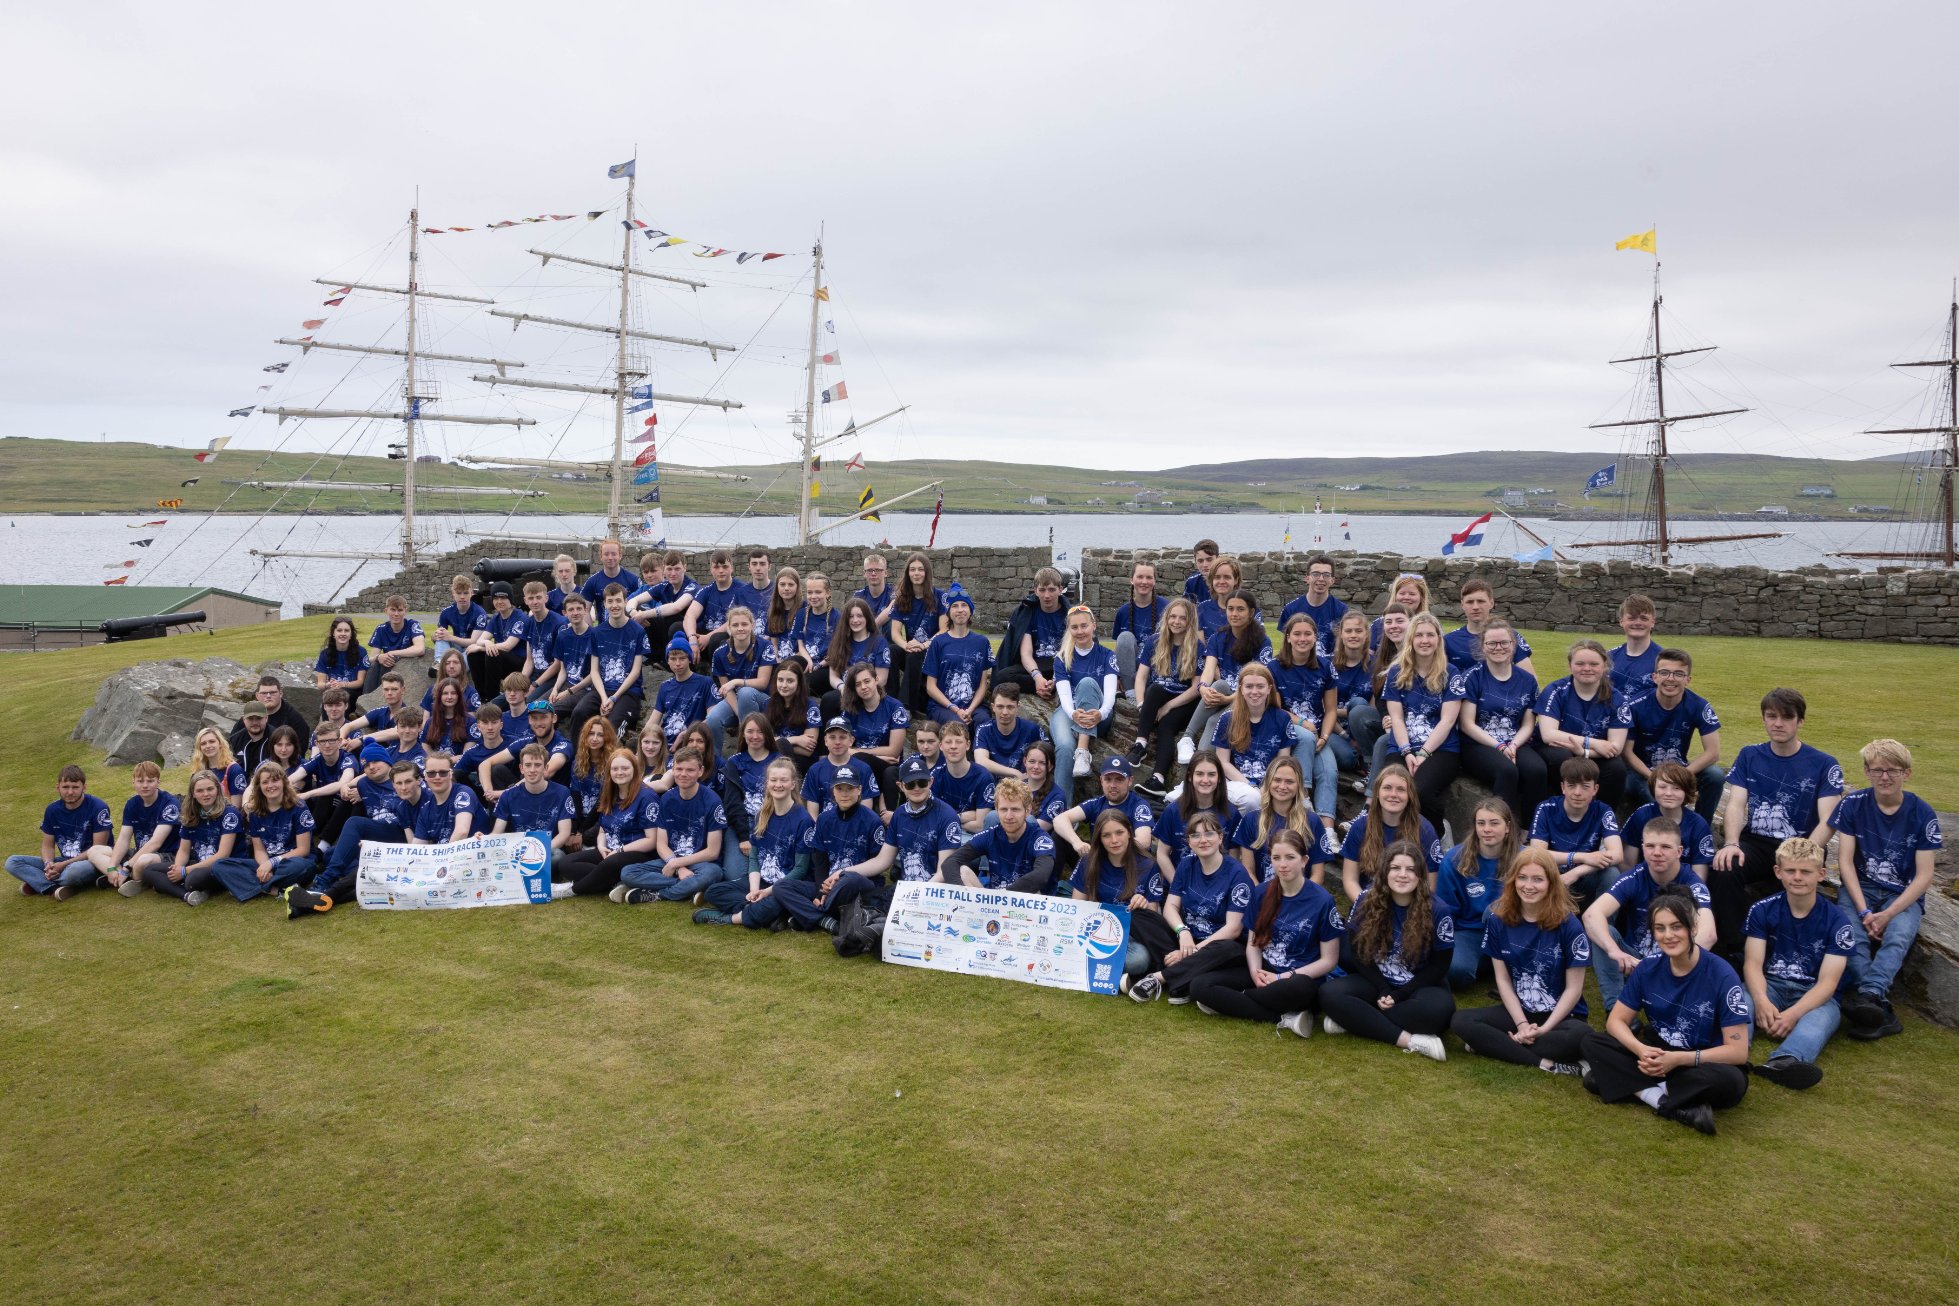 Sponsorship of 100 trainees, as pictured here, for The Tall Ships Races was a huge achievement for Sail Training Shetland. Credit: Ben Mullay.